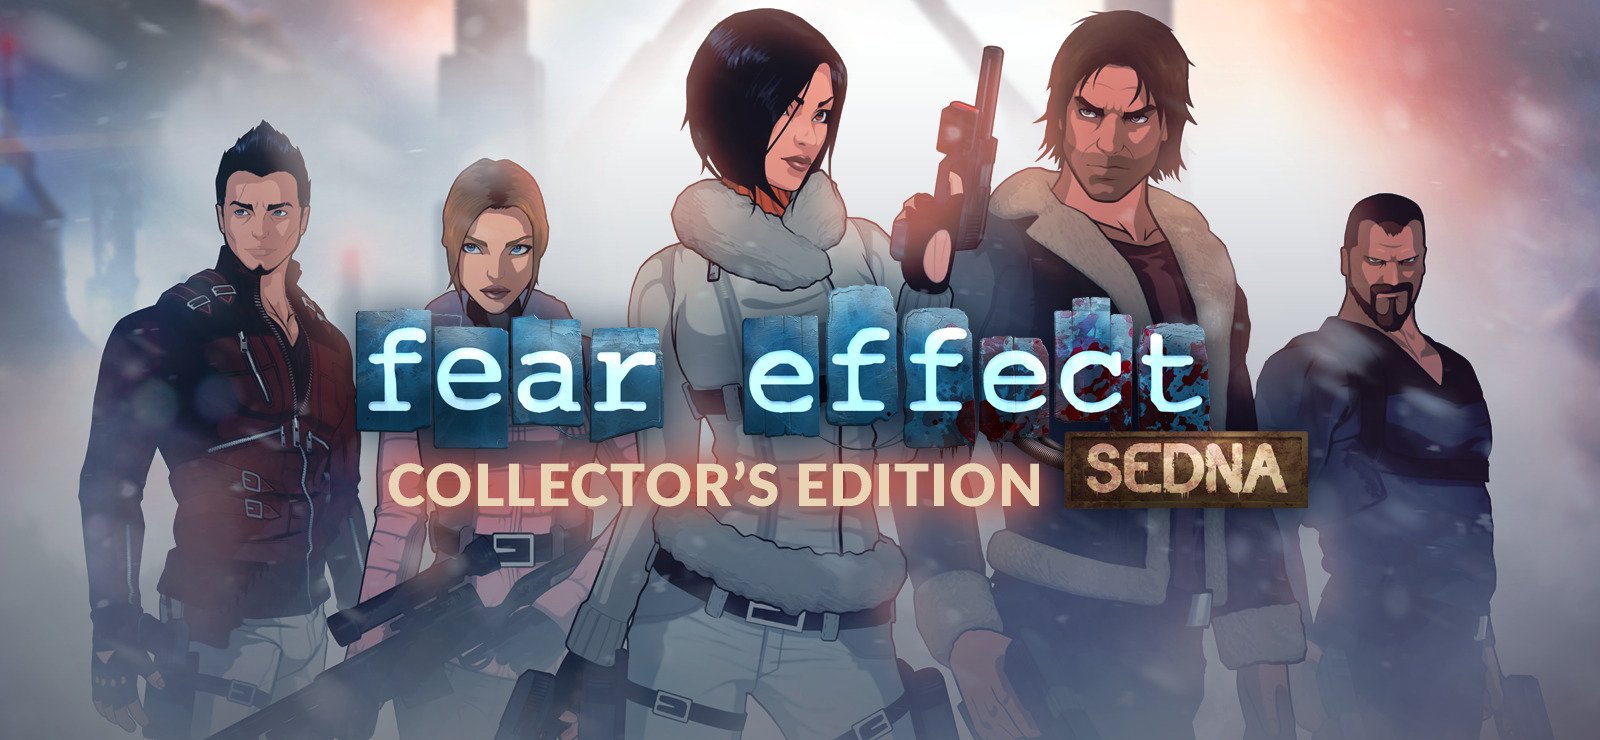 Fear Effect Sedna Collector's Edition 13